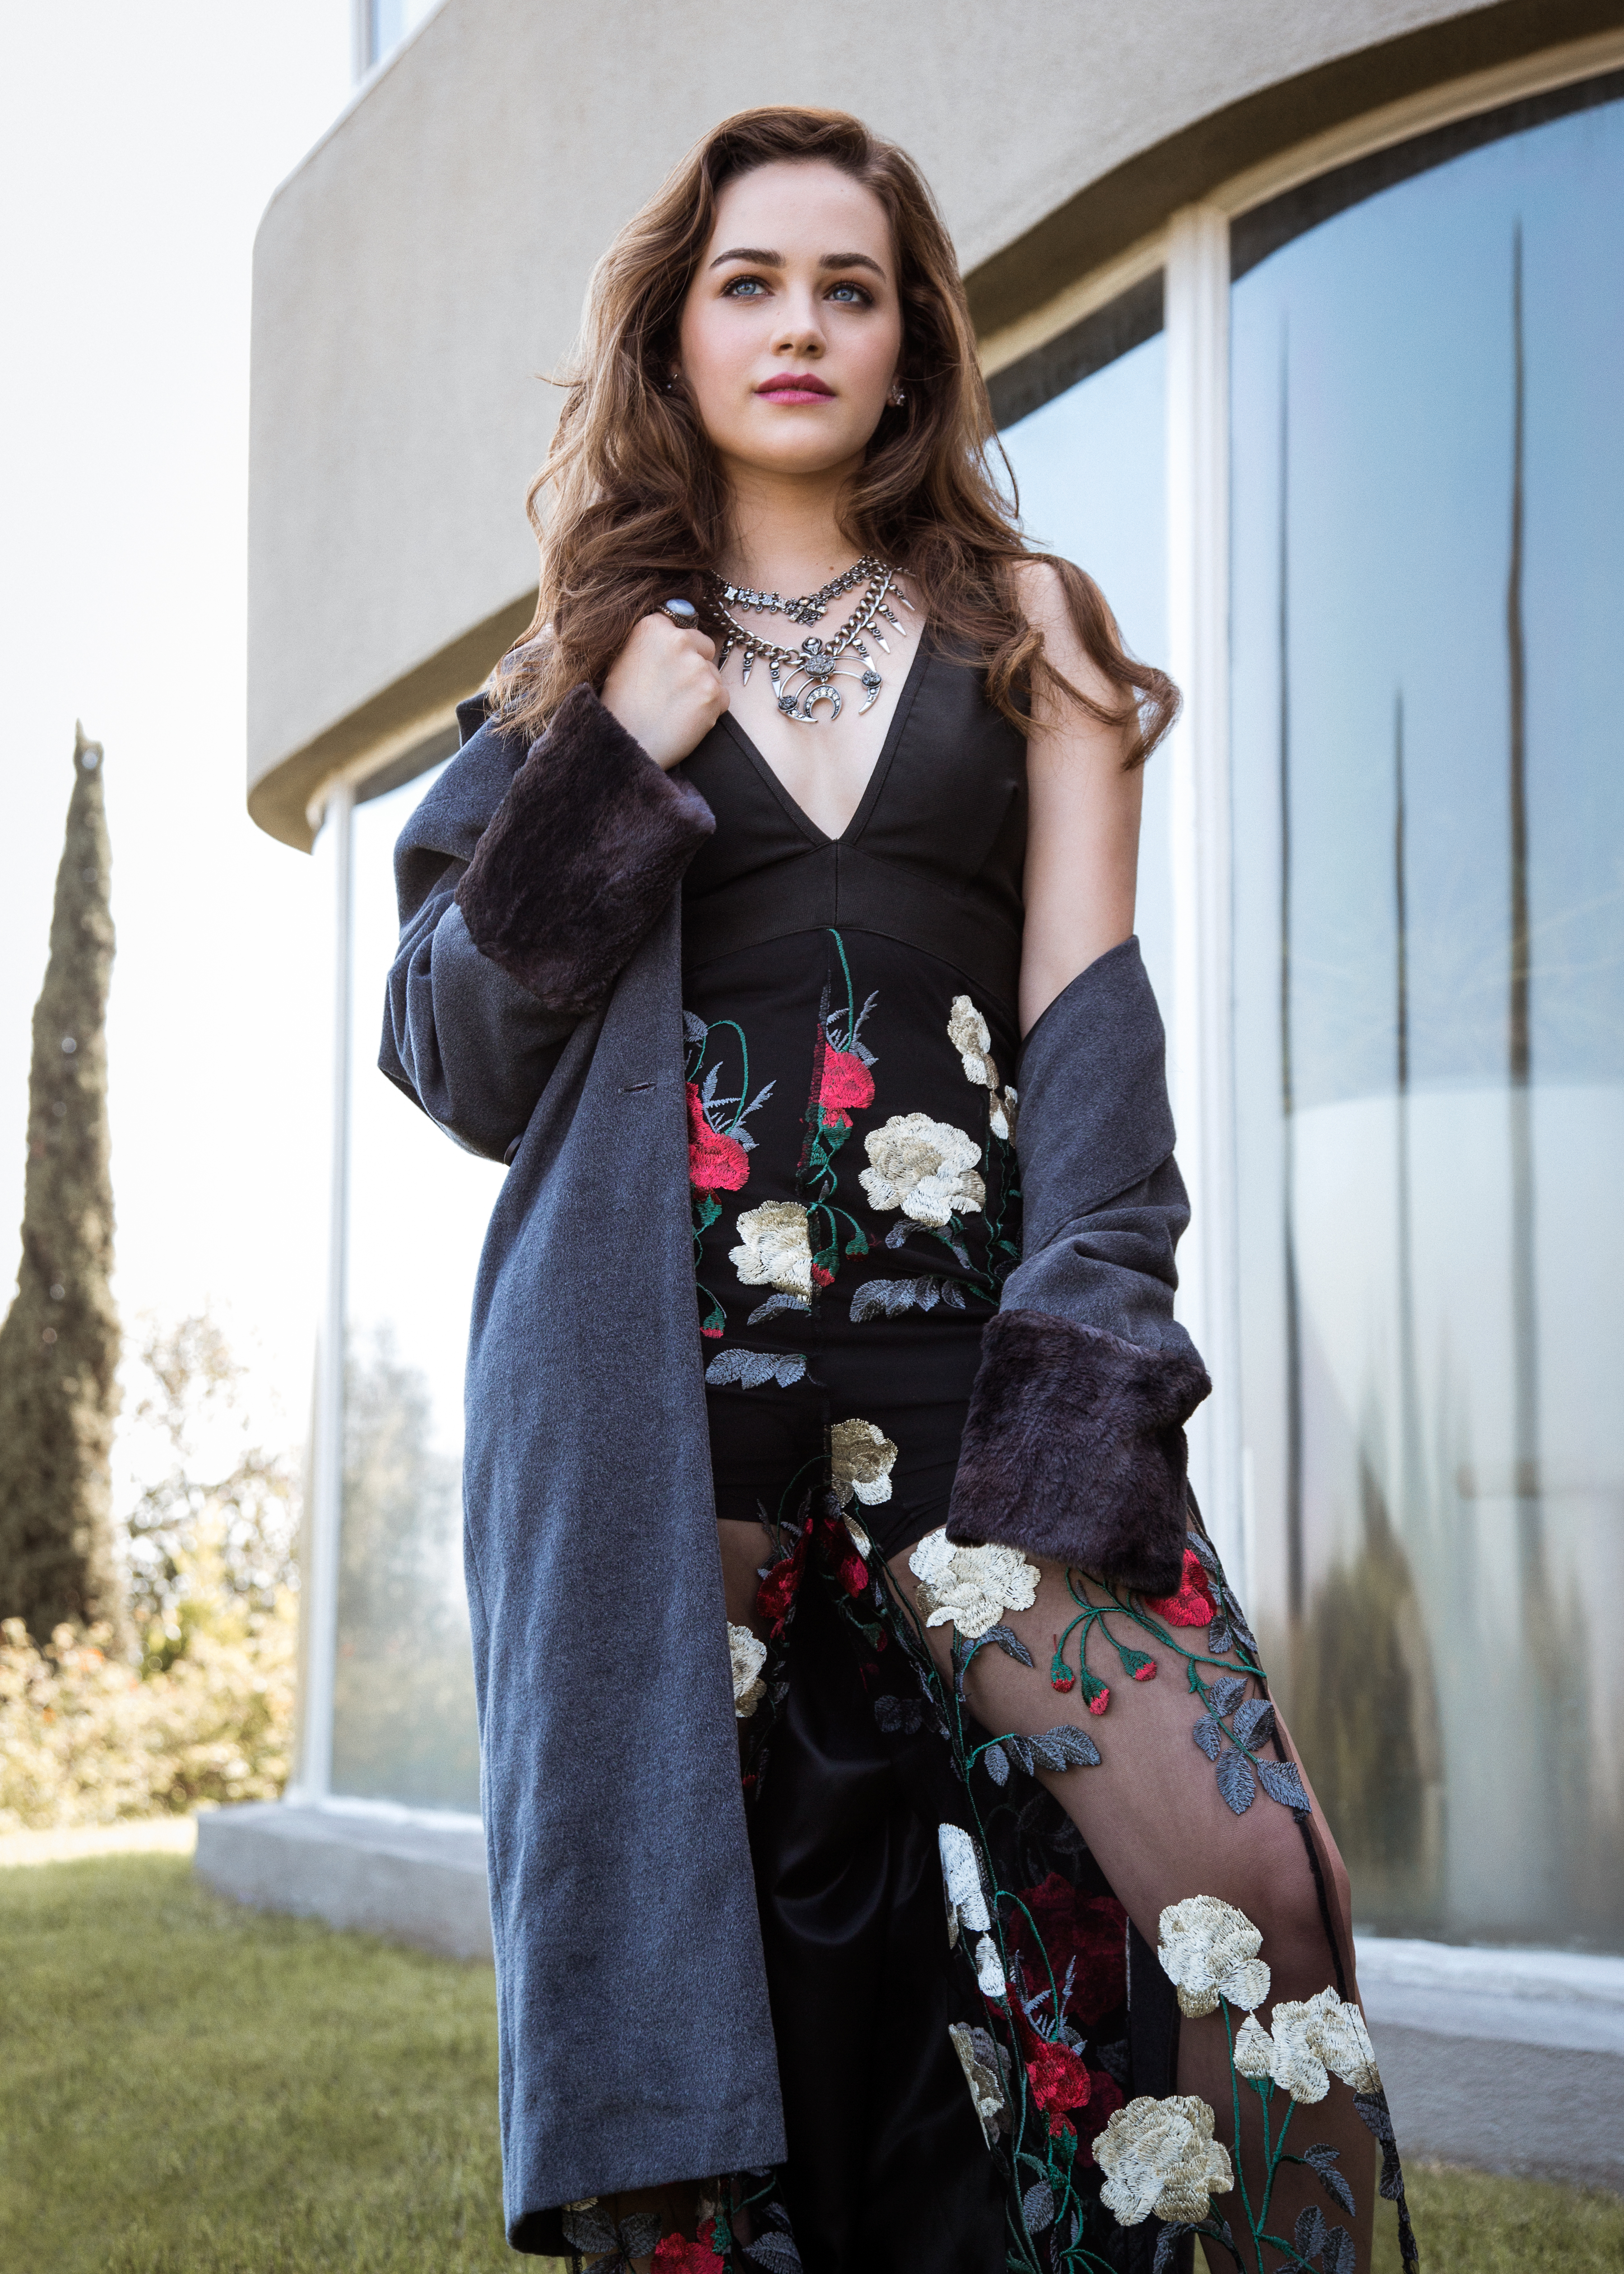 Mary Mouser photographed by Ted Sun.